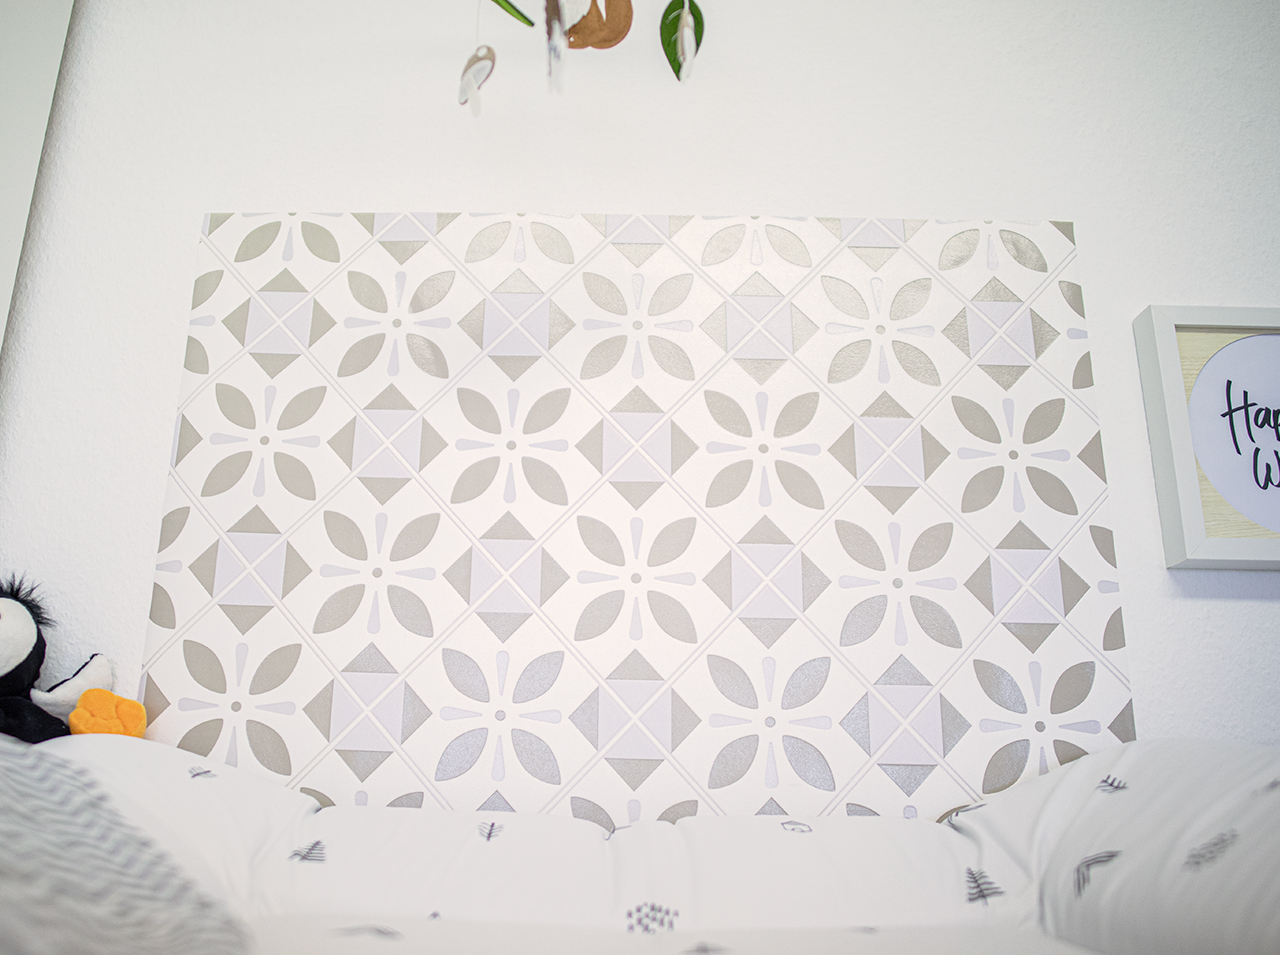 Above a dresser with a changing table attachment is wall paneling with an ornamental tile pattern in beige.